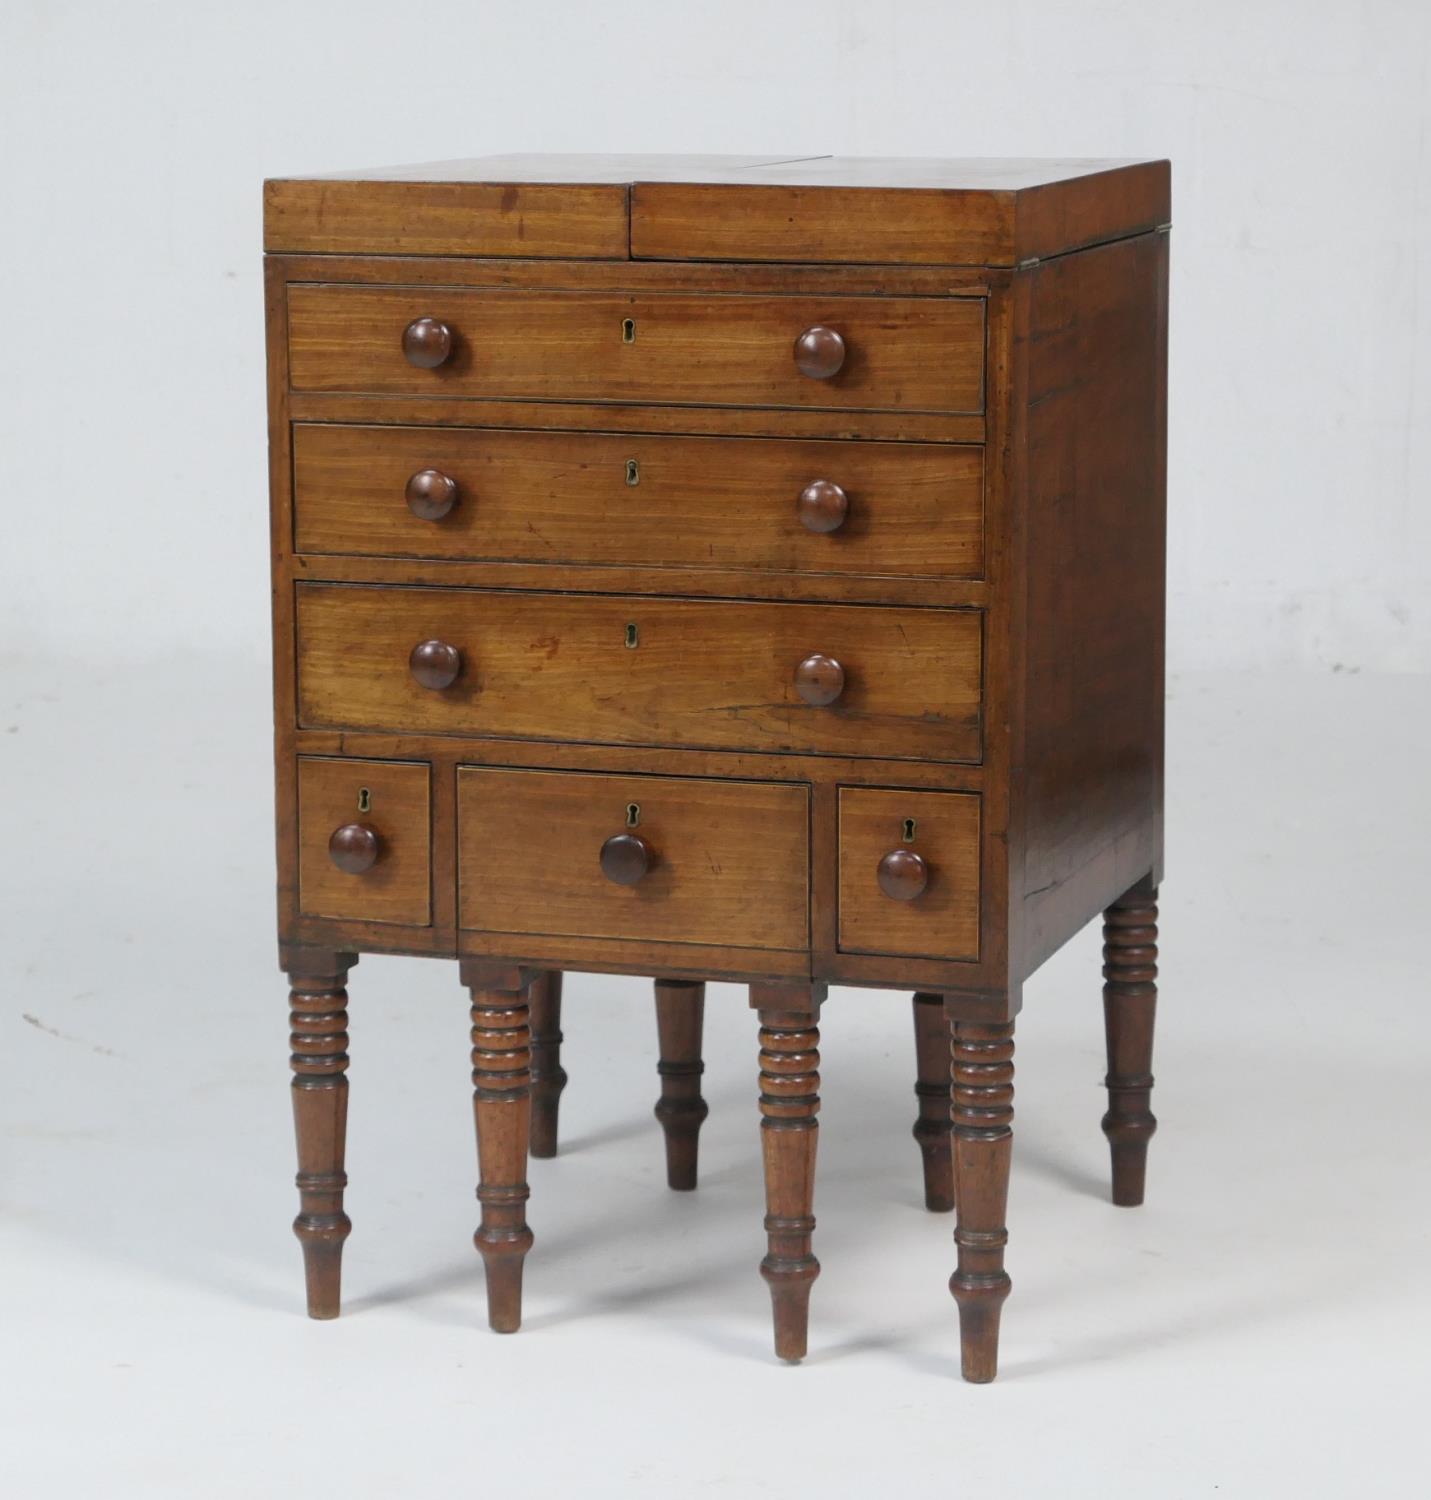 Early Victorian mahogany gentleman's washstand (now converted), the hinged top opening to reveal a